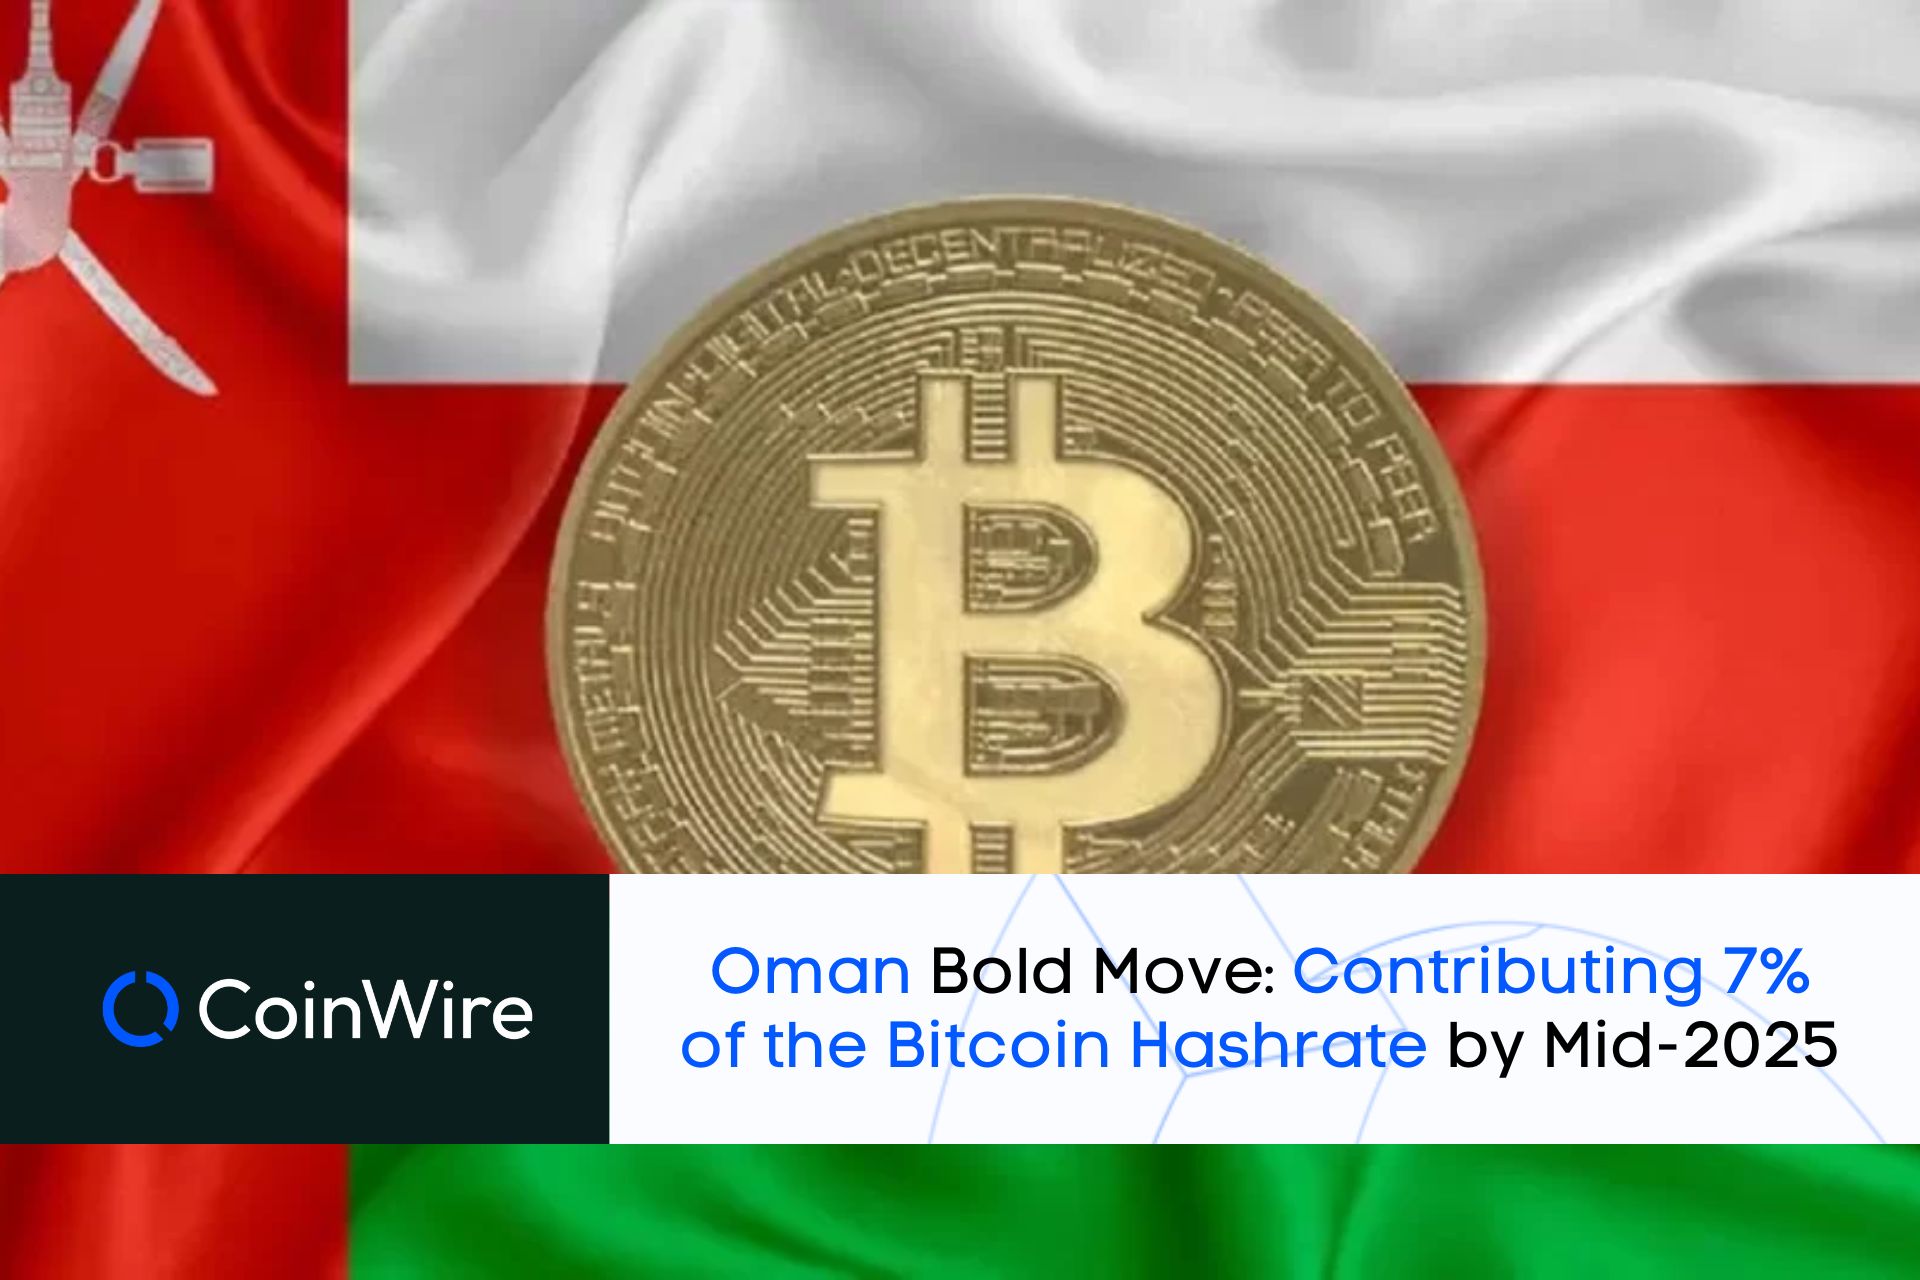 Oman'S Bold Move: Contributing 7% Of The Bitcoin Hashrate By Mid-2025